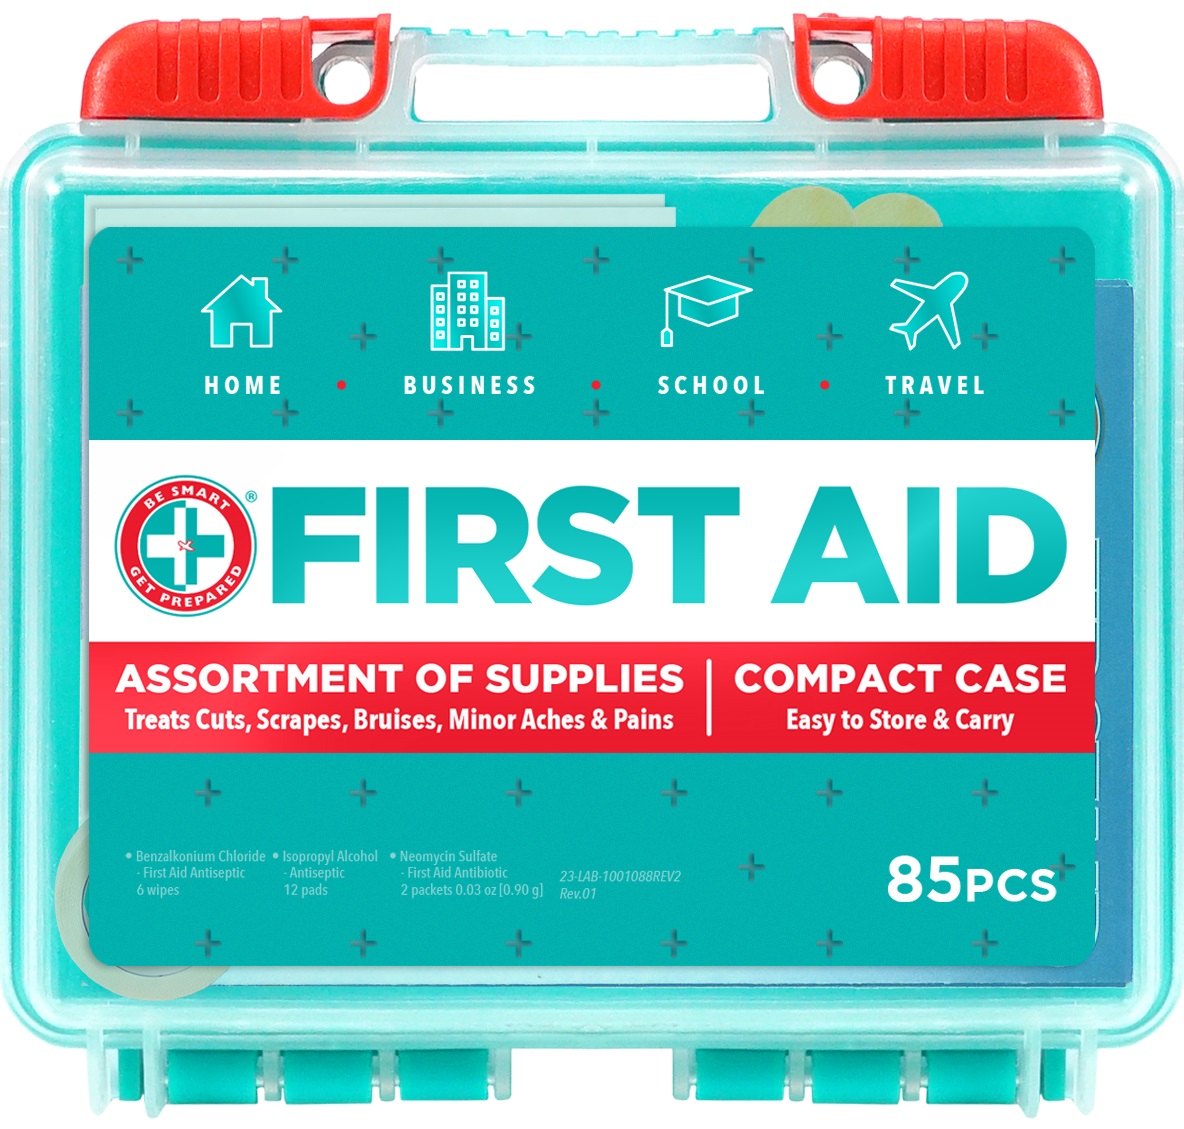 Be Smart Get Prepared First Aid Kit, 85 count - image 1 of 7